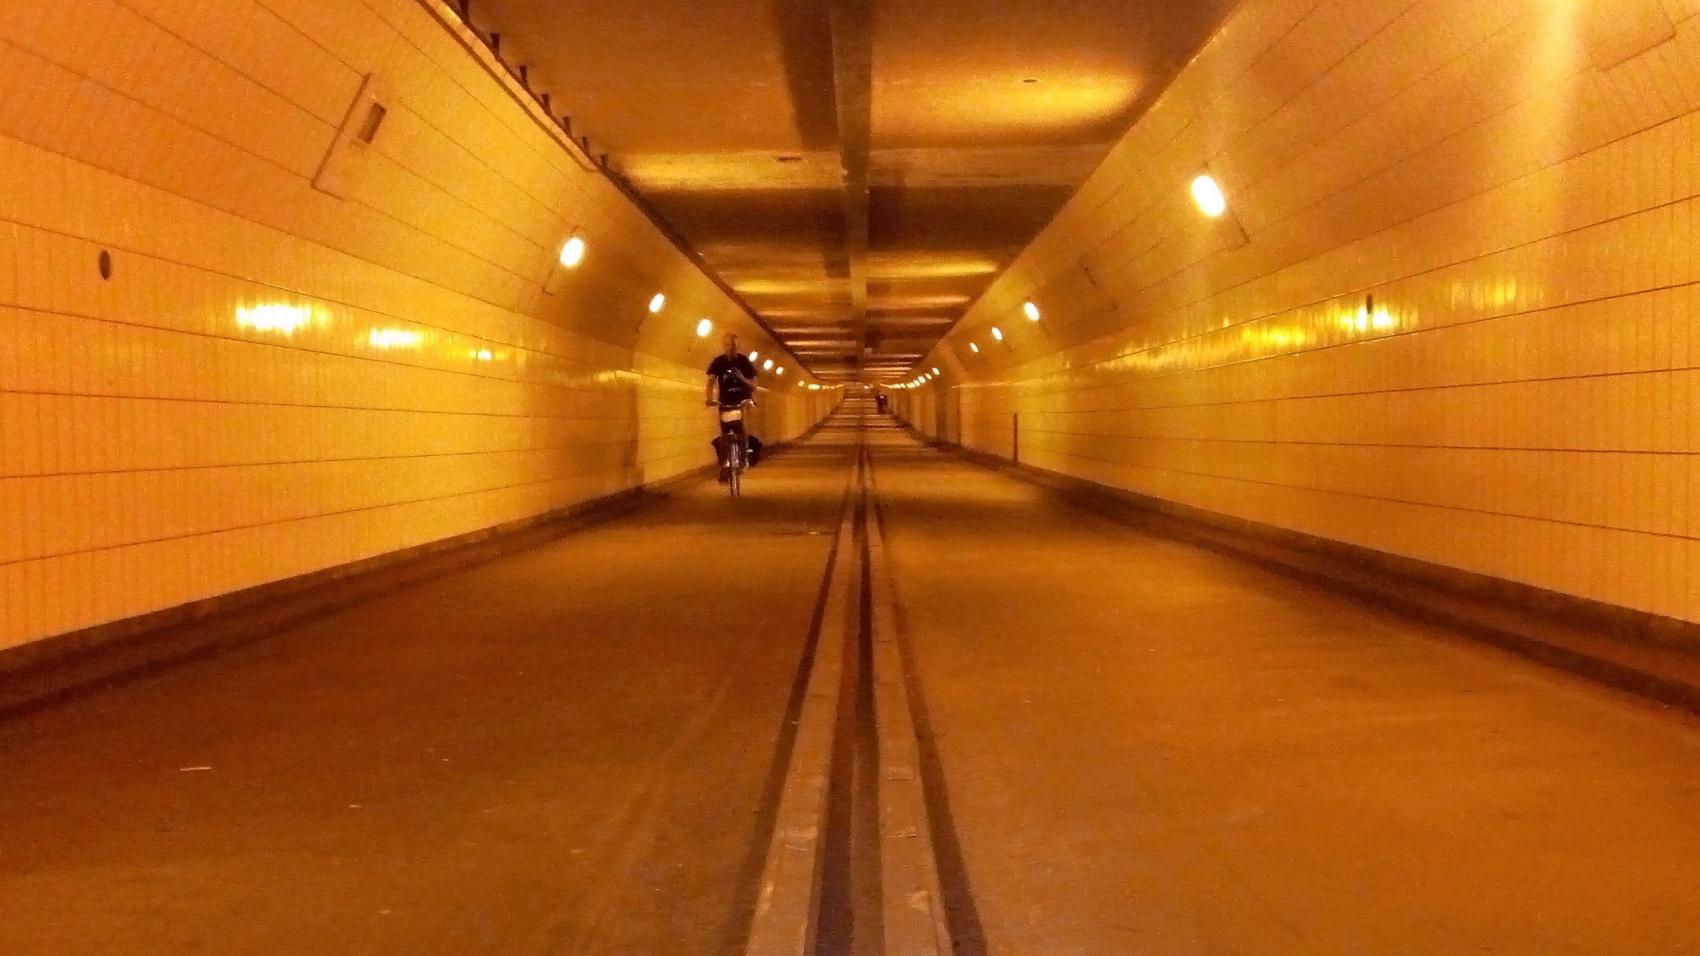 Inside the cycling tunnel. Kerb separates directions for cyclists.